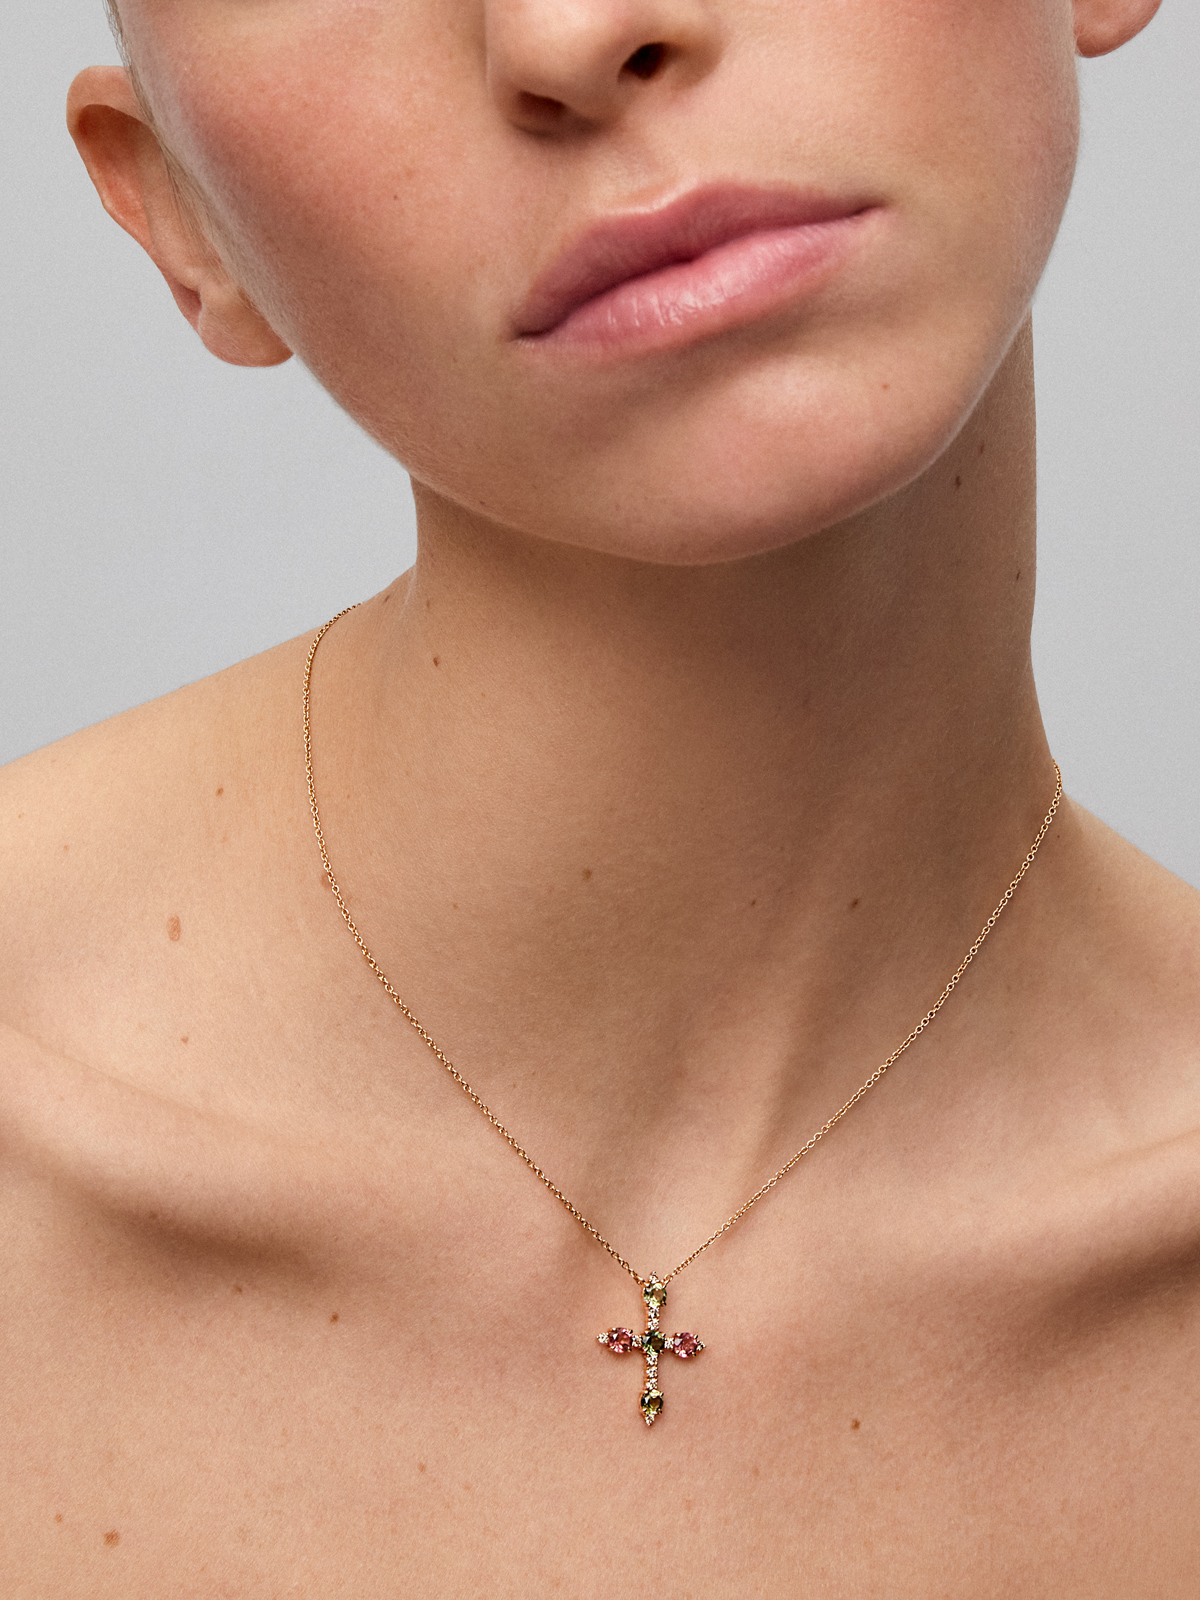 18K Rose Gold Cross Pendant Chain with Green Tourmaline and Pink Tourmaline